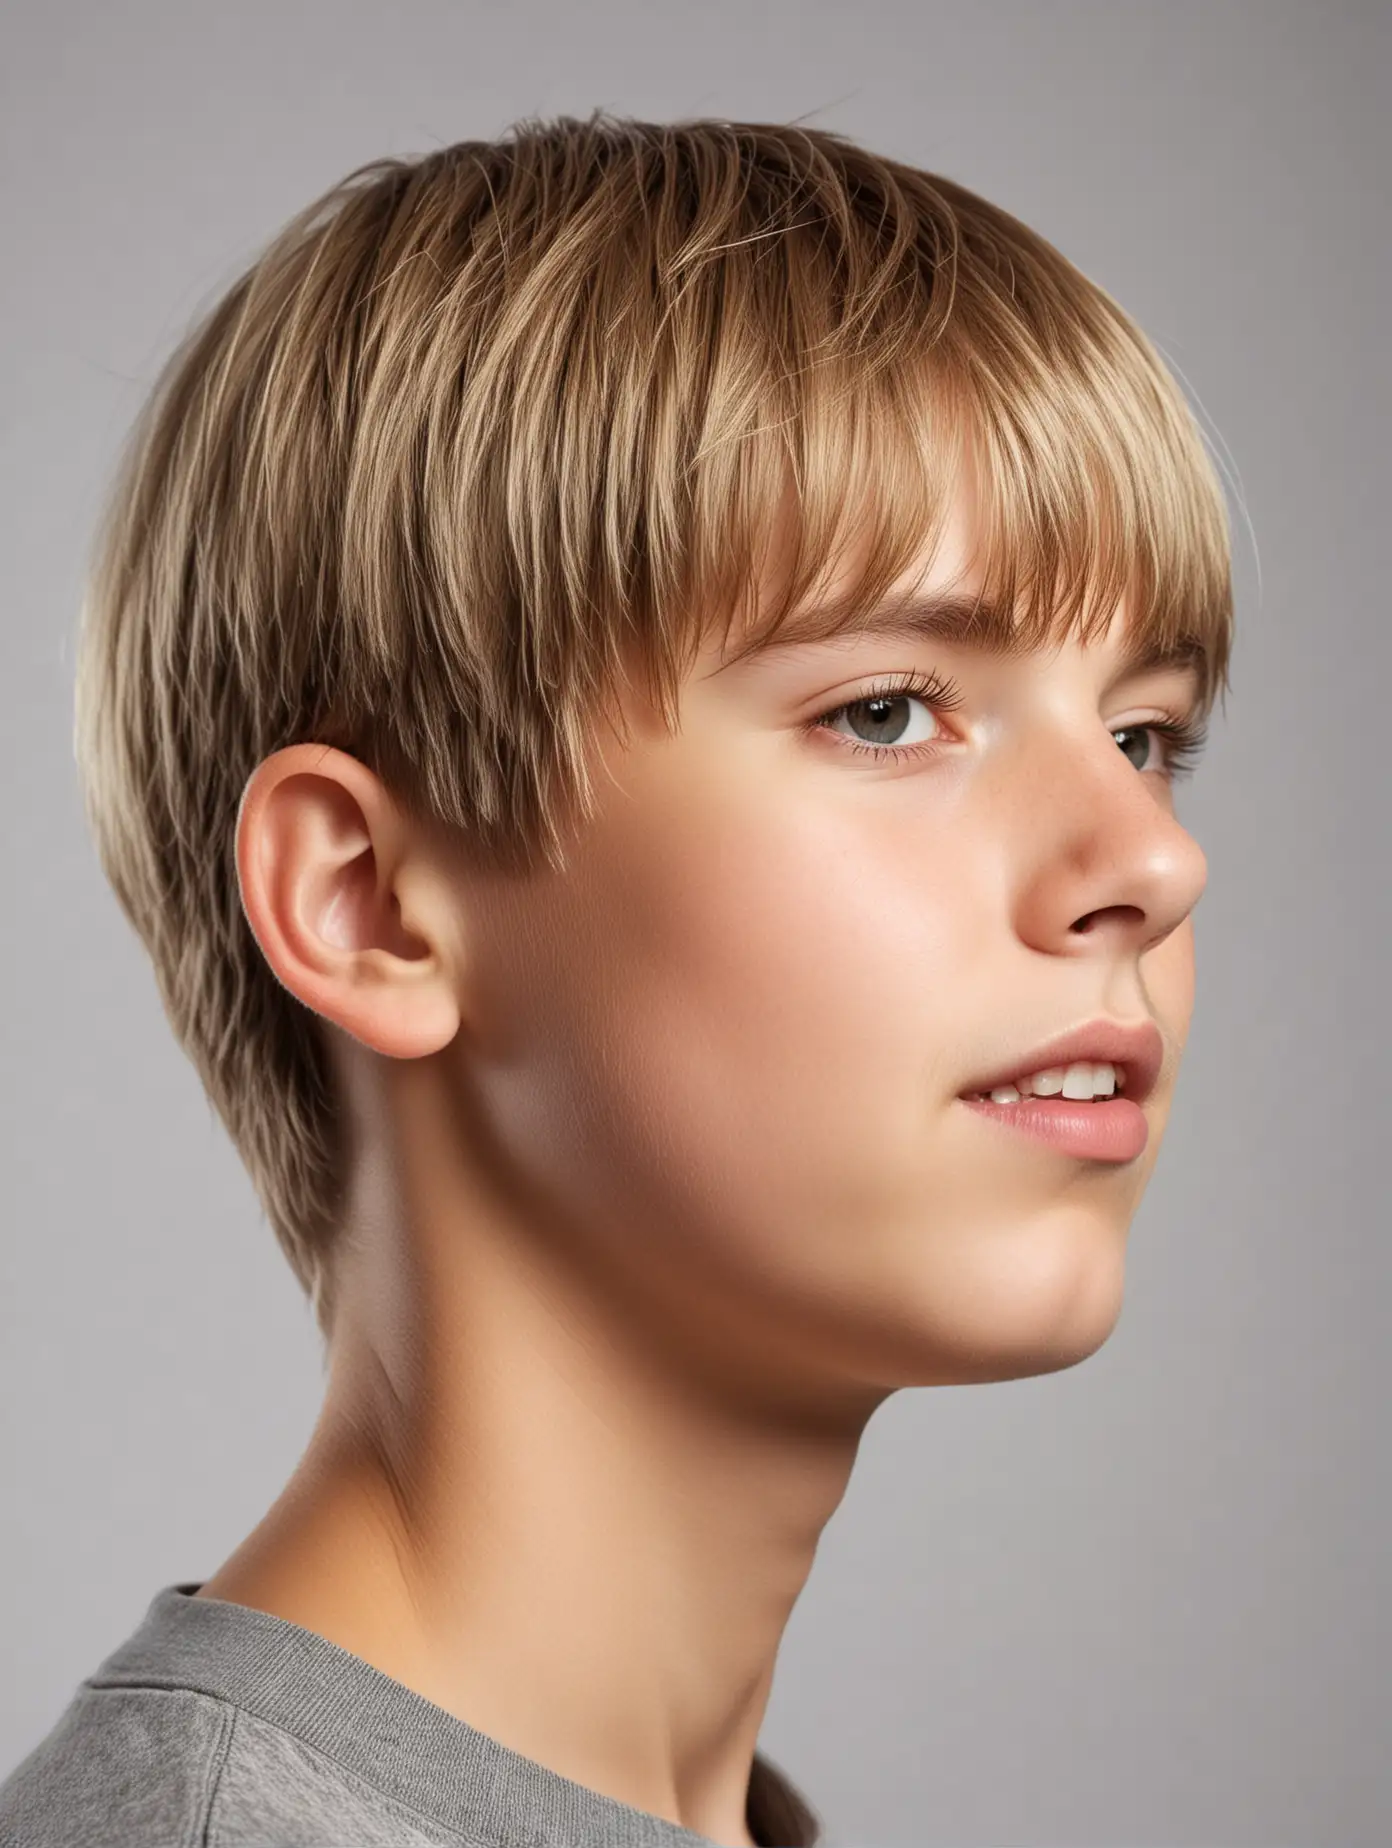 Studio Quality Portrait of Twelve Year Old Boy with Soft Shiny Bowl Cut Hair in Bright Light